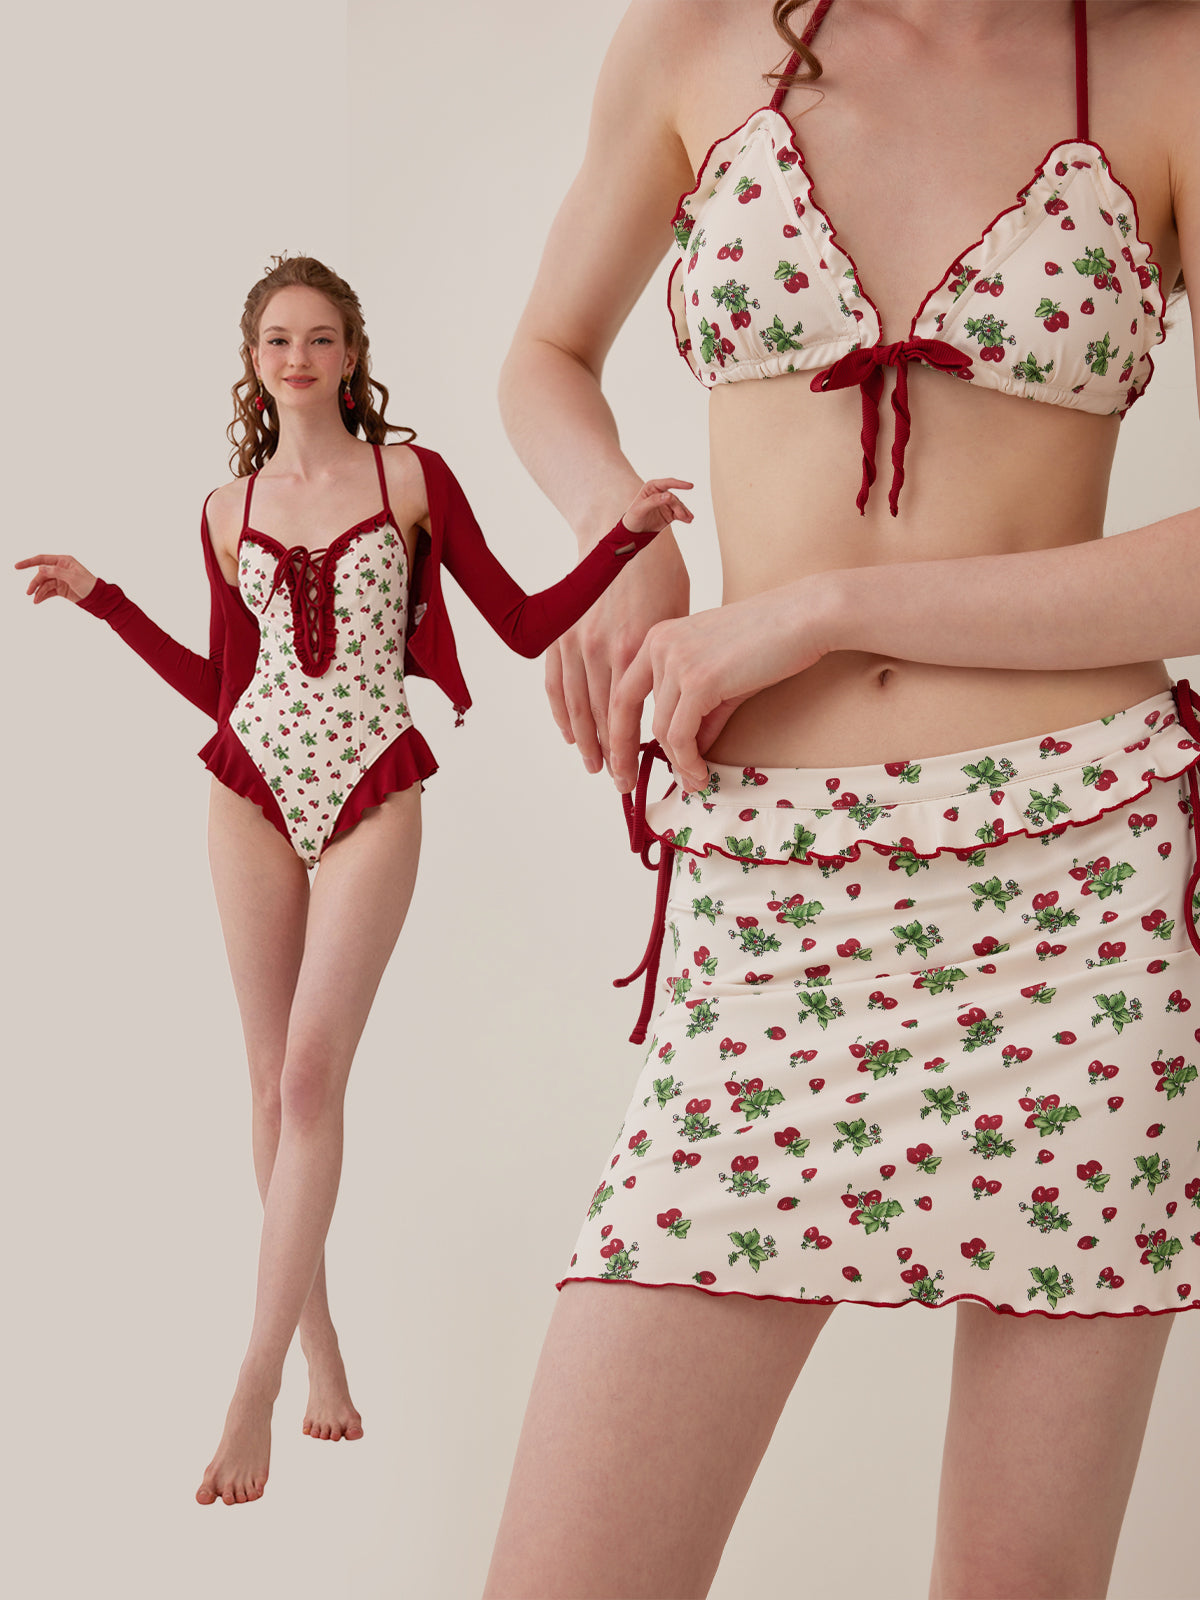 Retro Red One-Piece Swimsuit + 3-Piece Set-Up Swimsuit